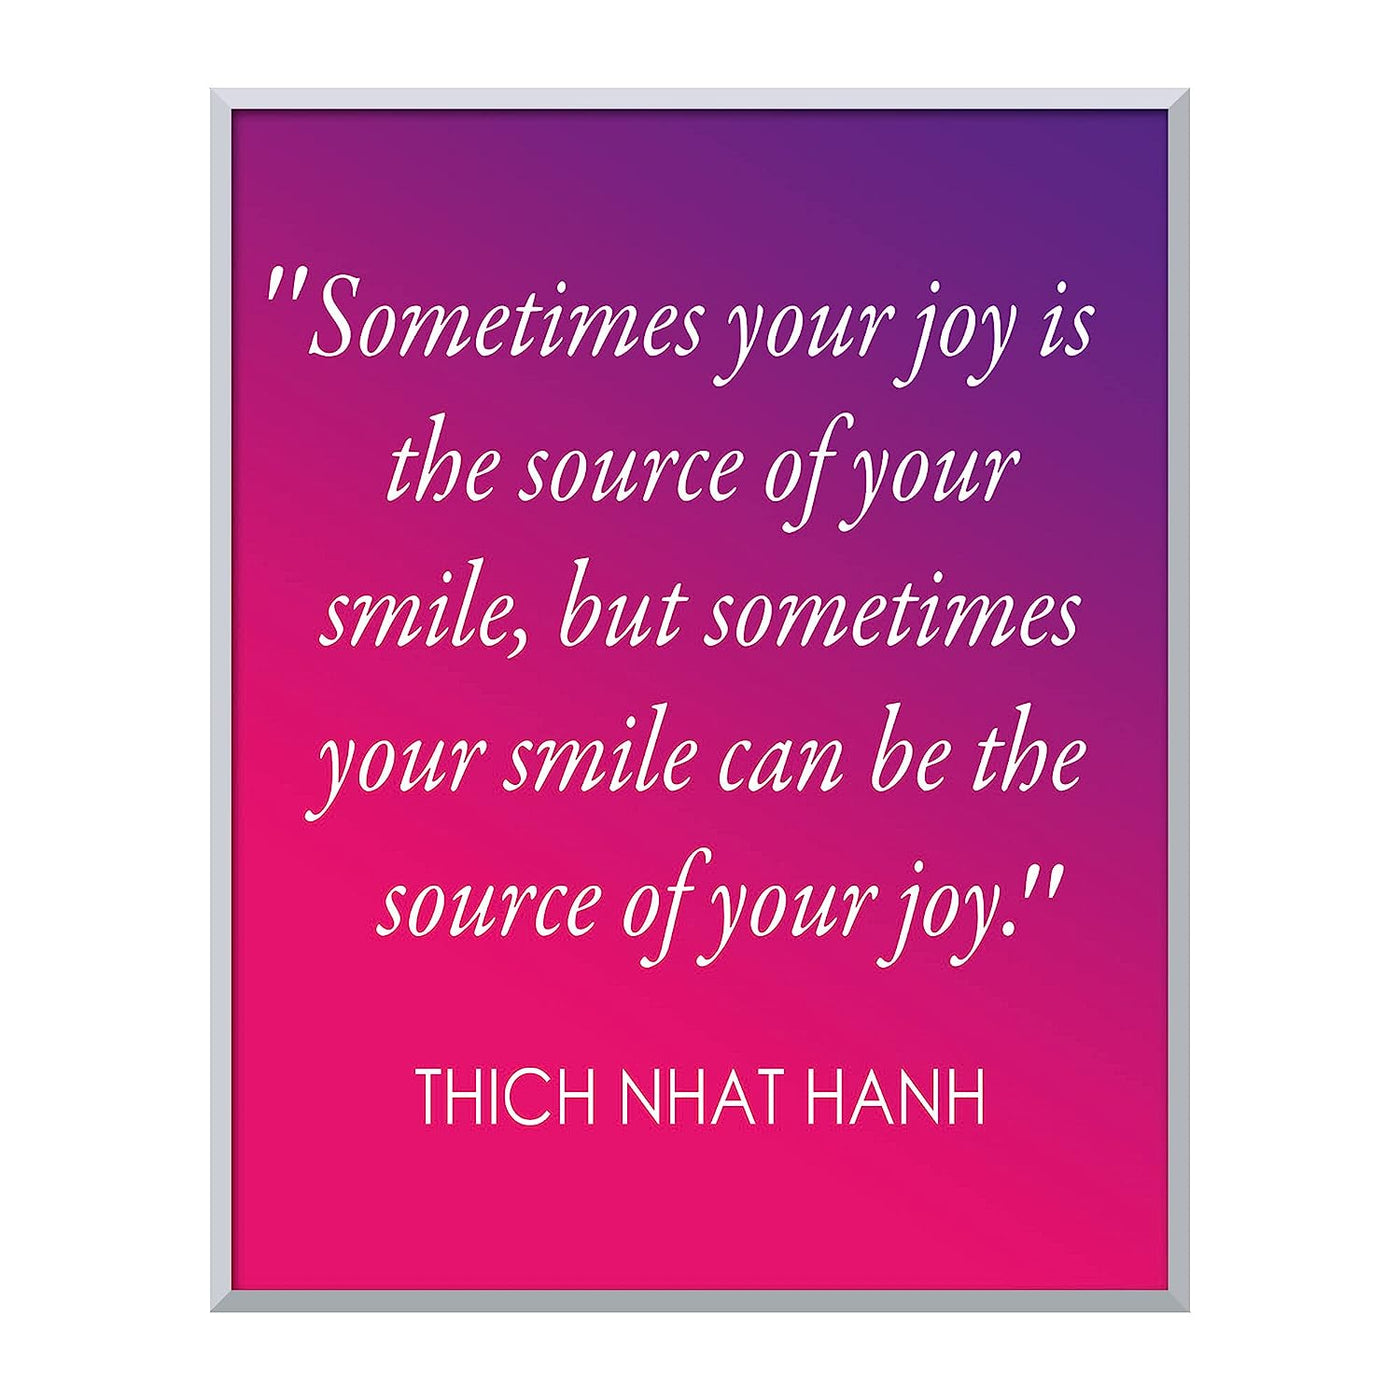 Your Smile Can Be the Source of Your Joy -Thich Nhat Hanh Mindfulness Quotes -8 x 10" Spiritual Wall Art Print-Ready to Frame. Home-Office-Studio-Meditation-Zen Decor. Great Life Lesson-Smile!